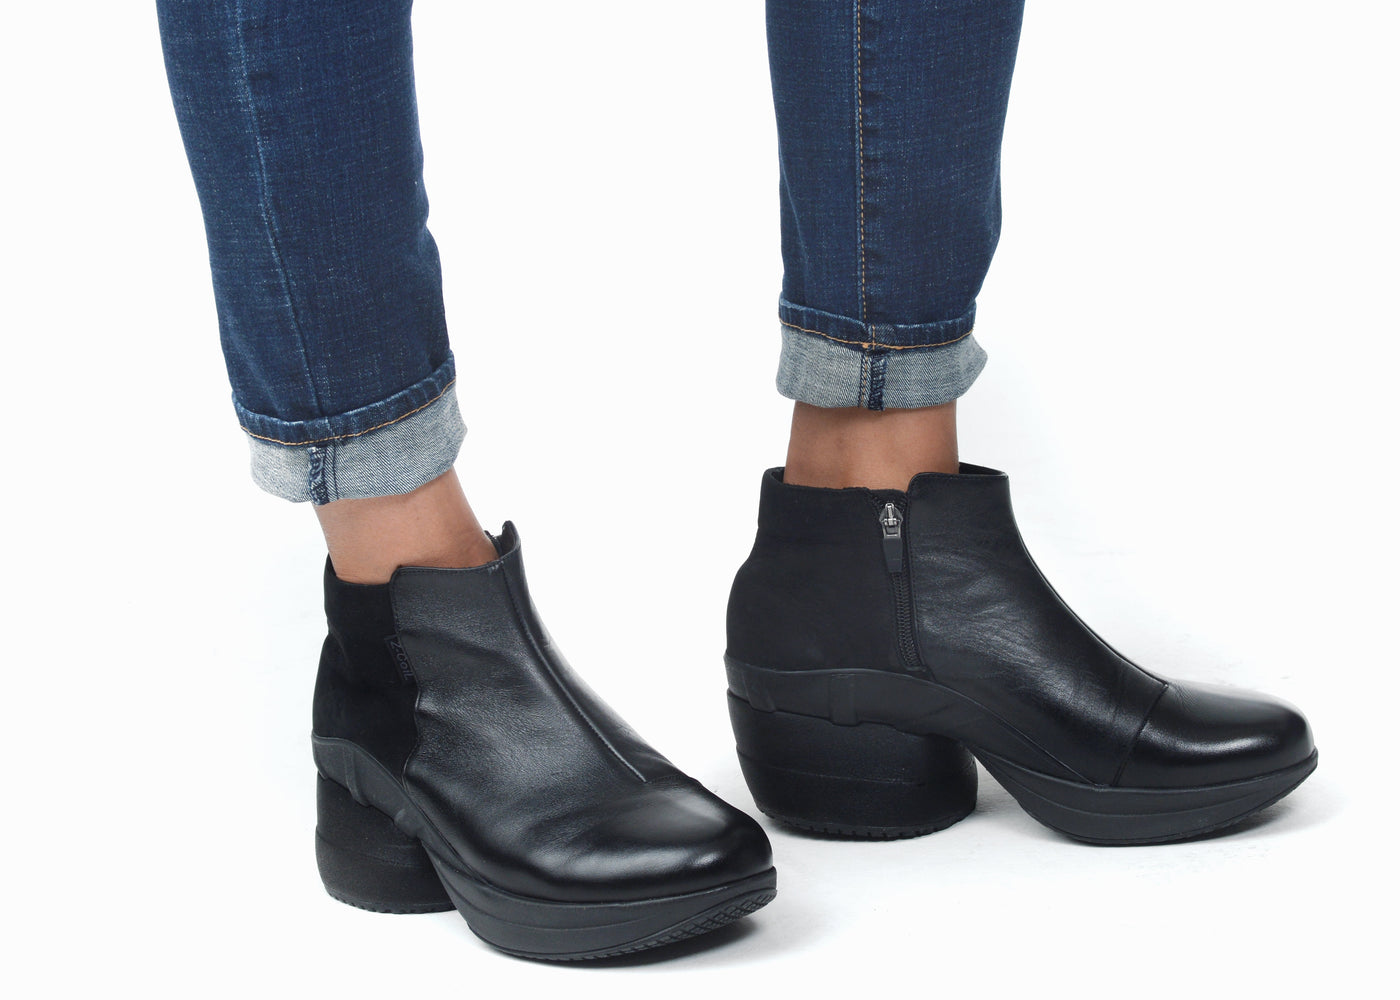 Uncompromising Fashion Olivia Z-CoiL Pain Relief Footwear